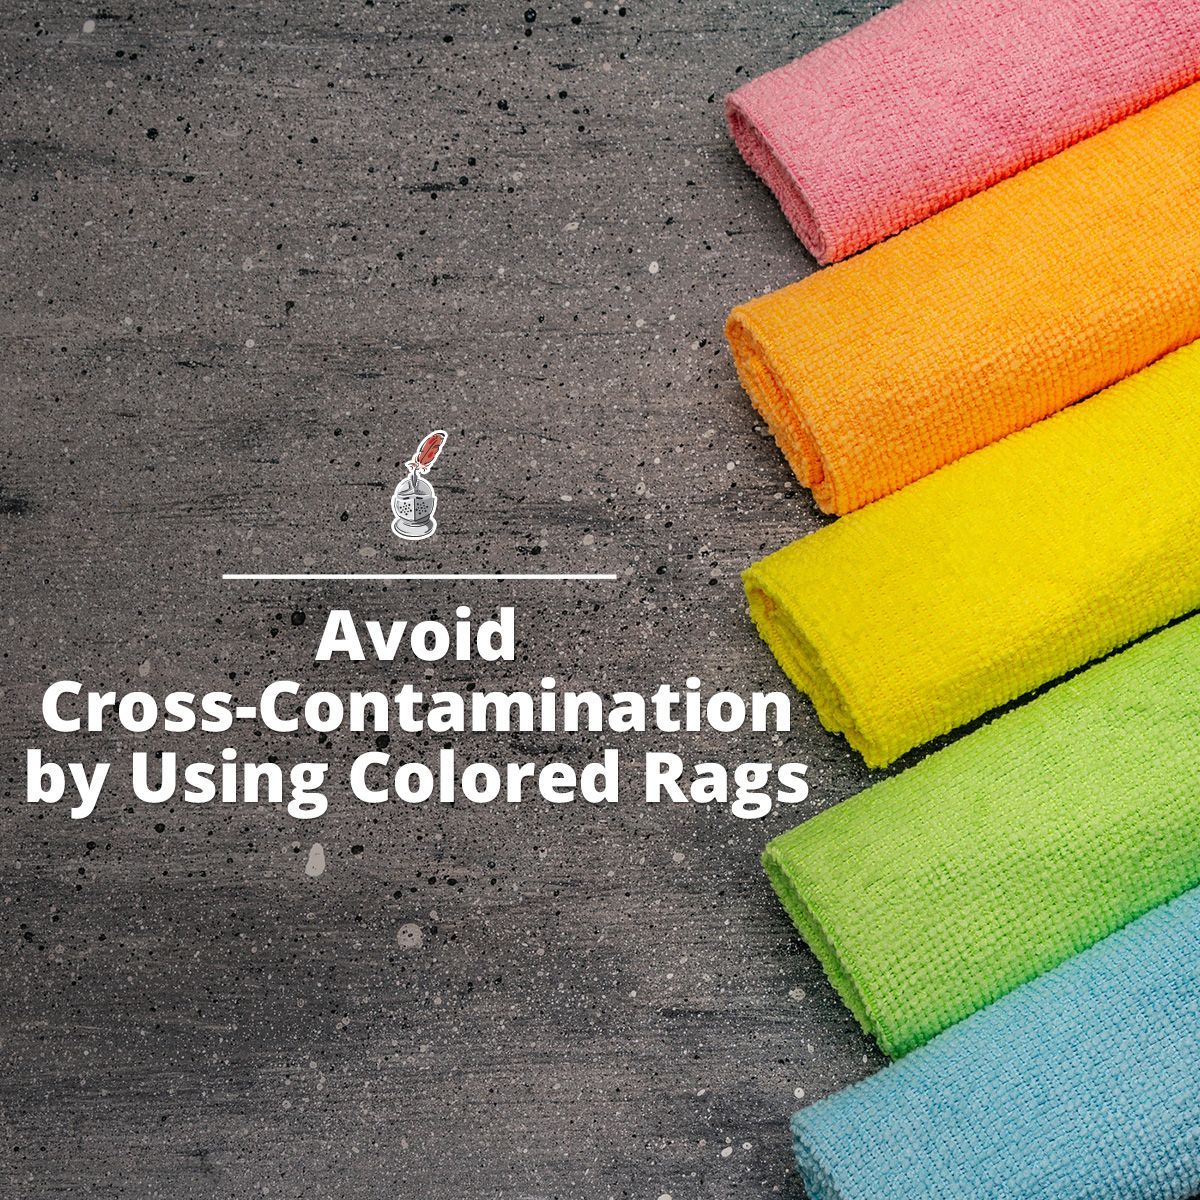 Avoid Cross-Contamination by Using Colored Rags